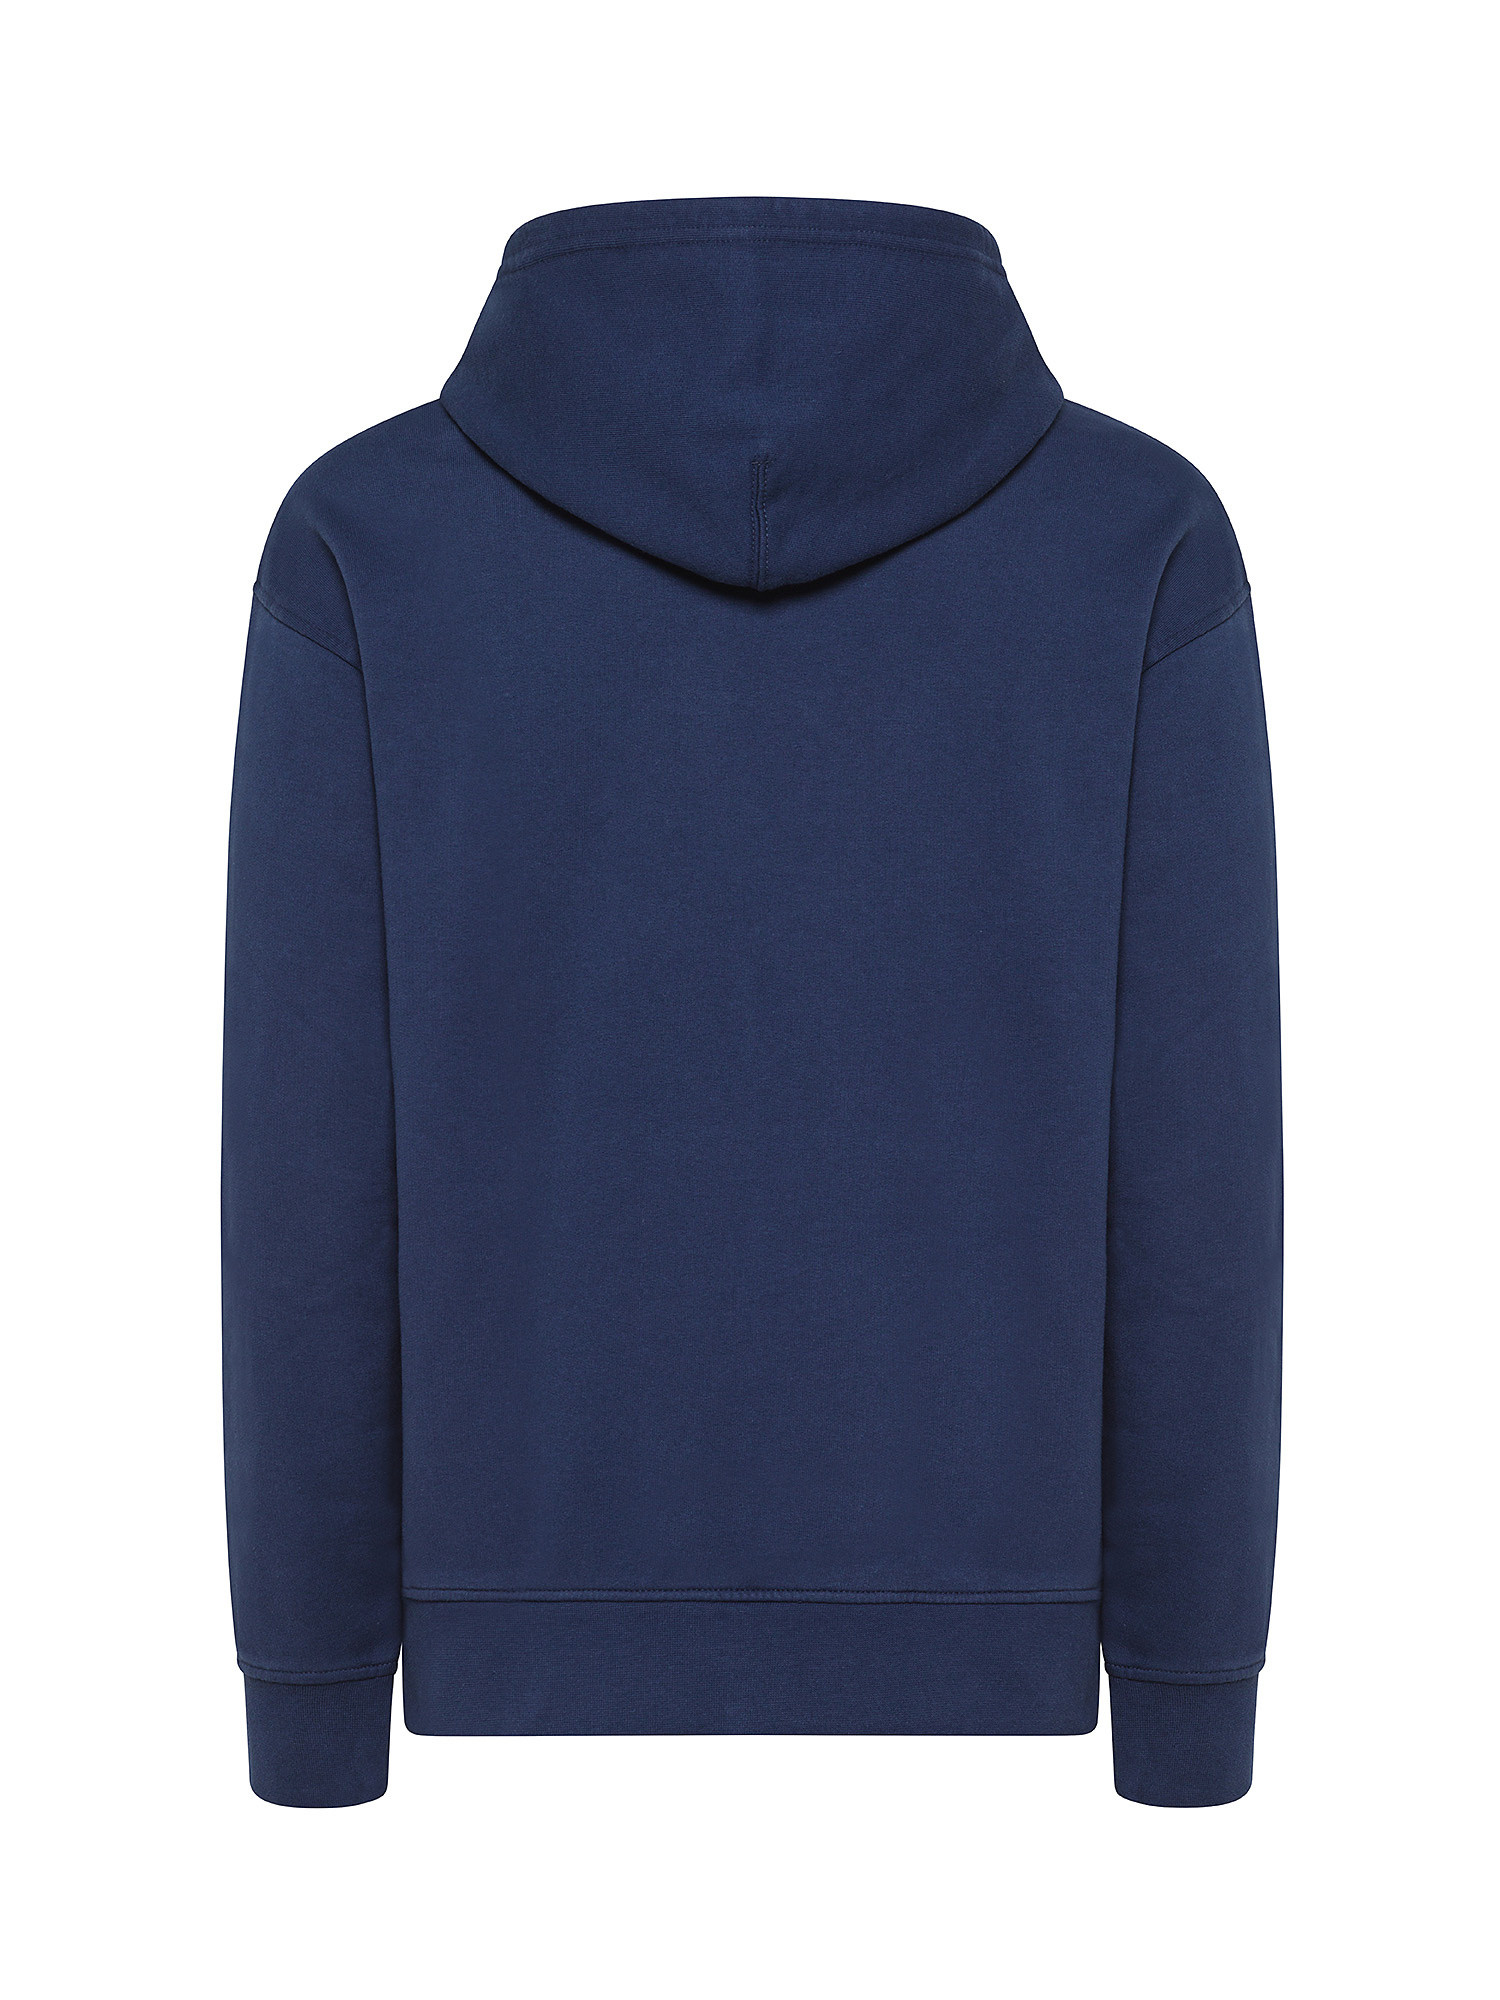 Levi's - Relaxed graphic sweatshirt in cotton, Dark Blue, large image number 1